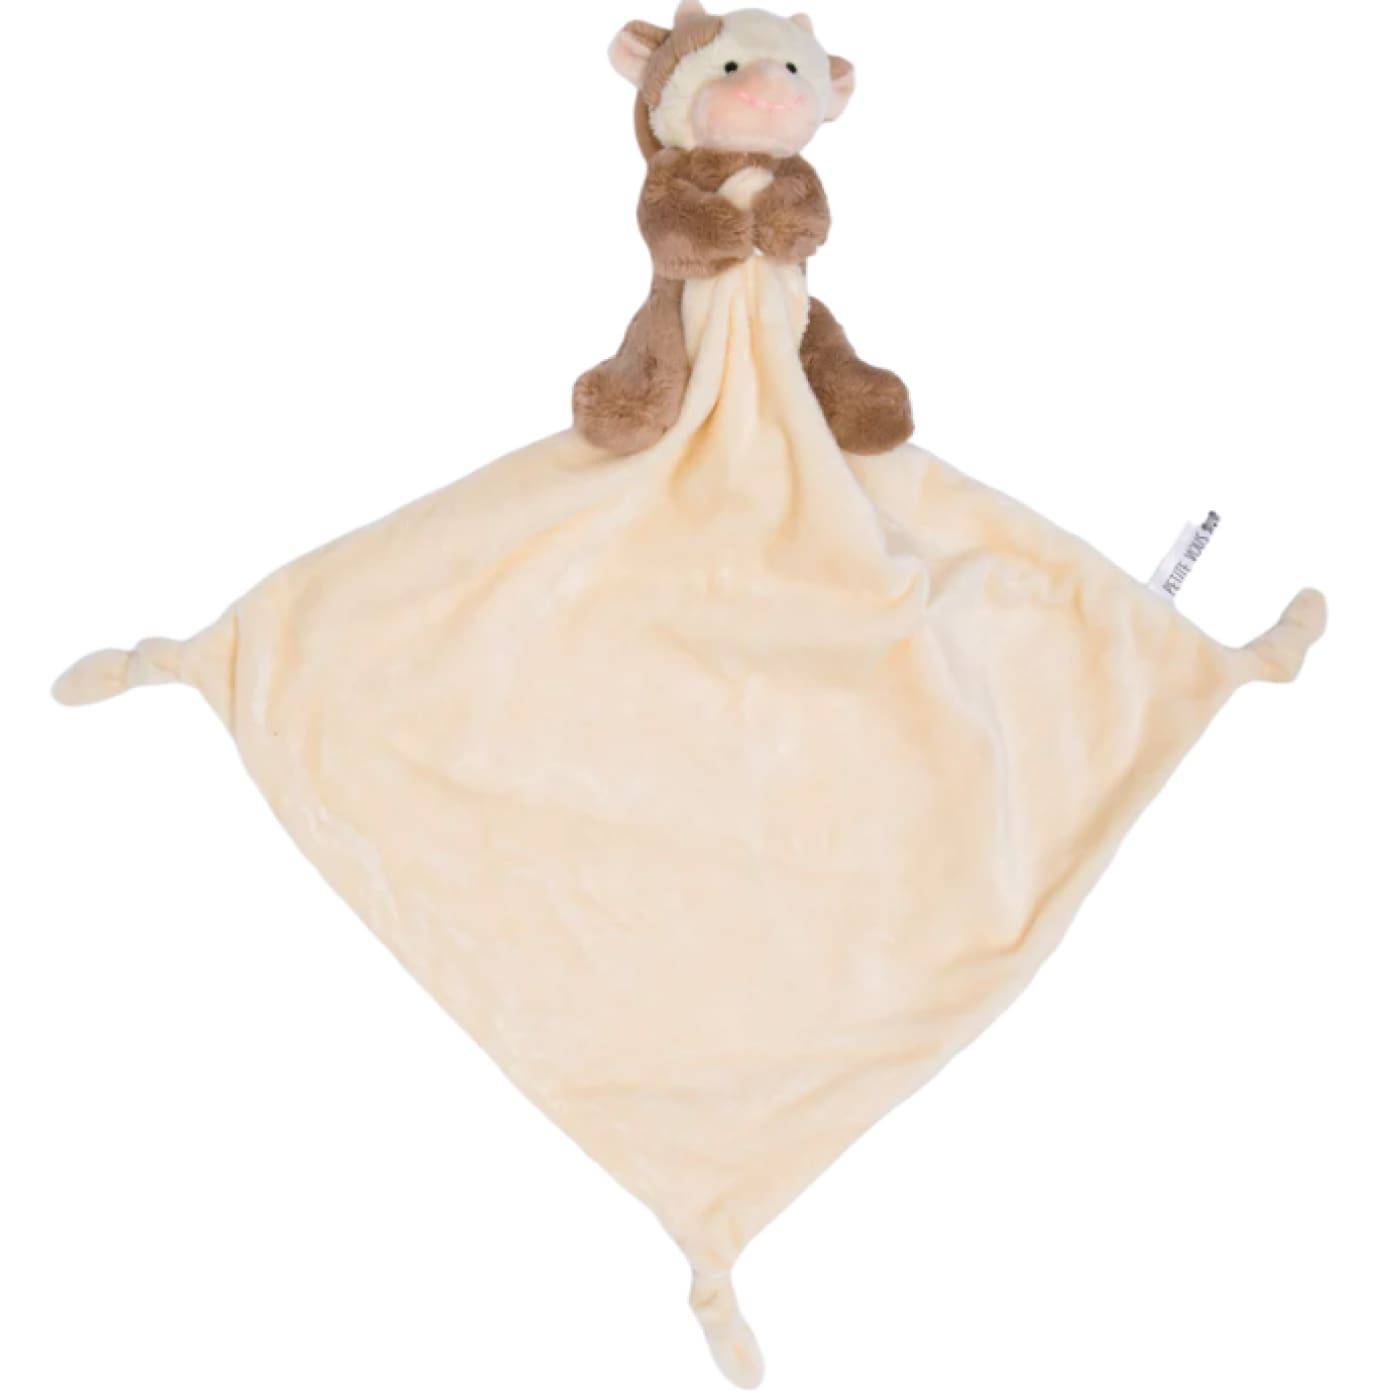 Petite Vous Comfort Blanket Charlie the Cow - Cow - TOYS & PLAY - BLANKIES/COMFORTERS/RATTLES